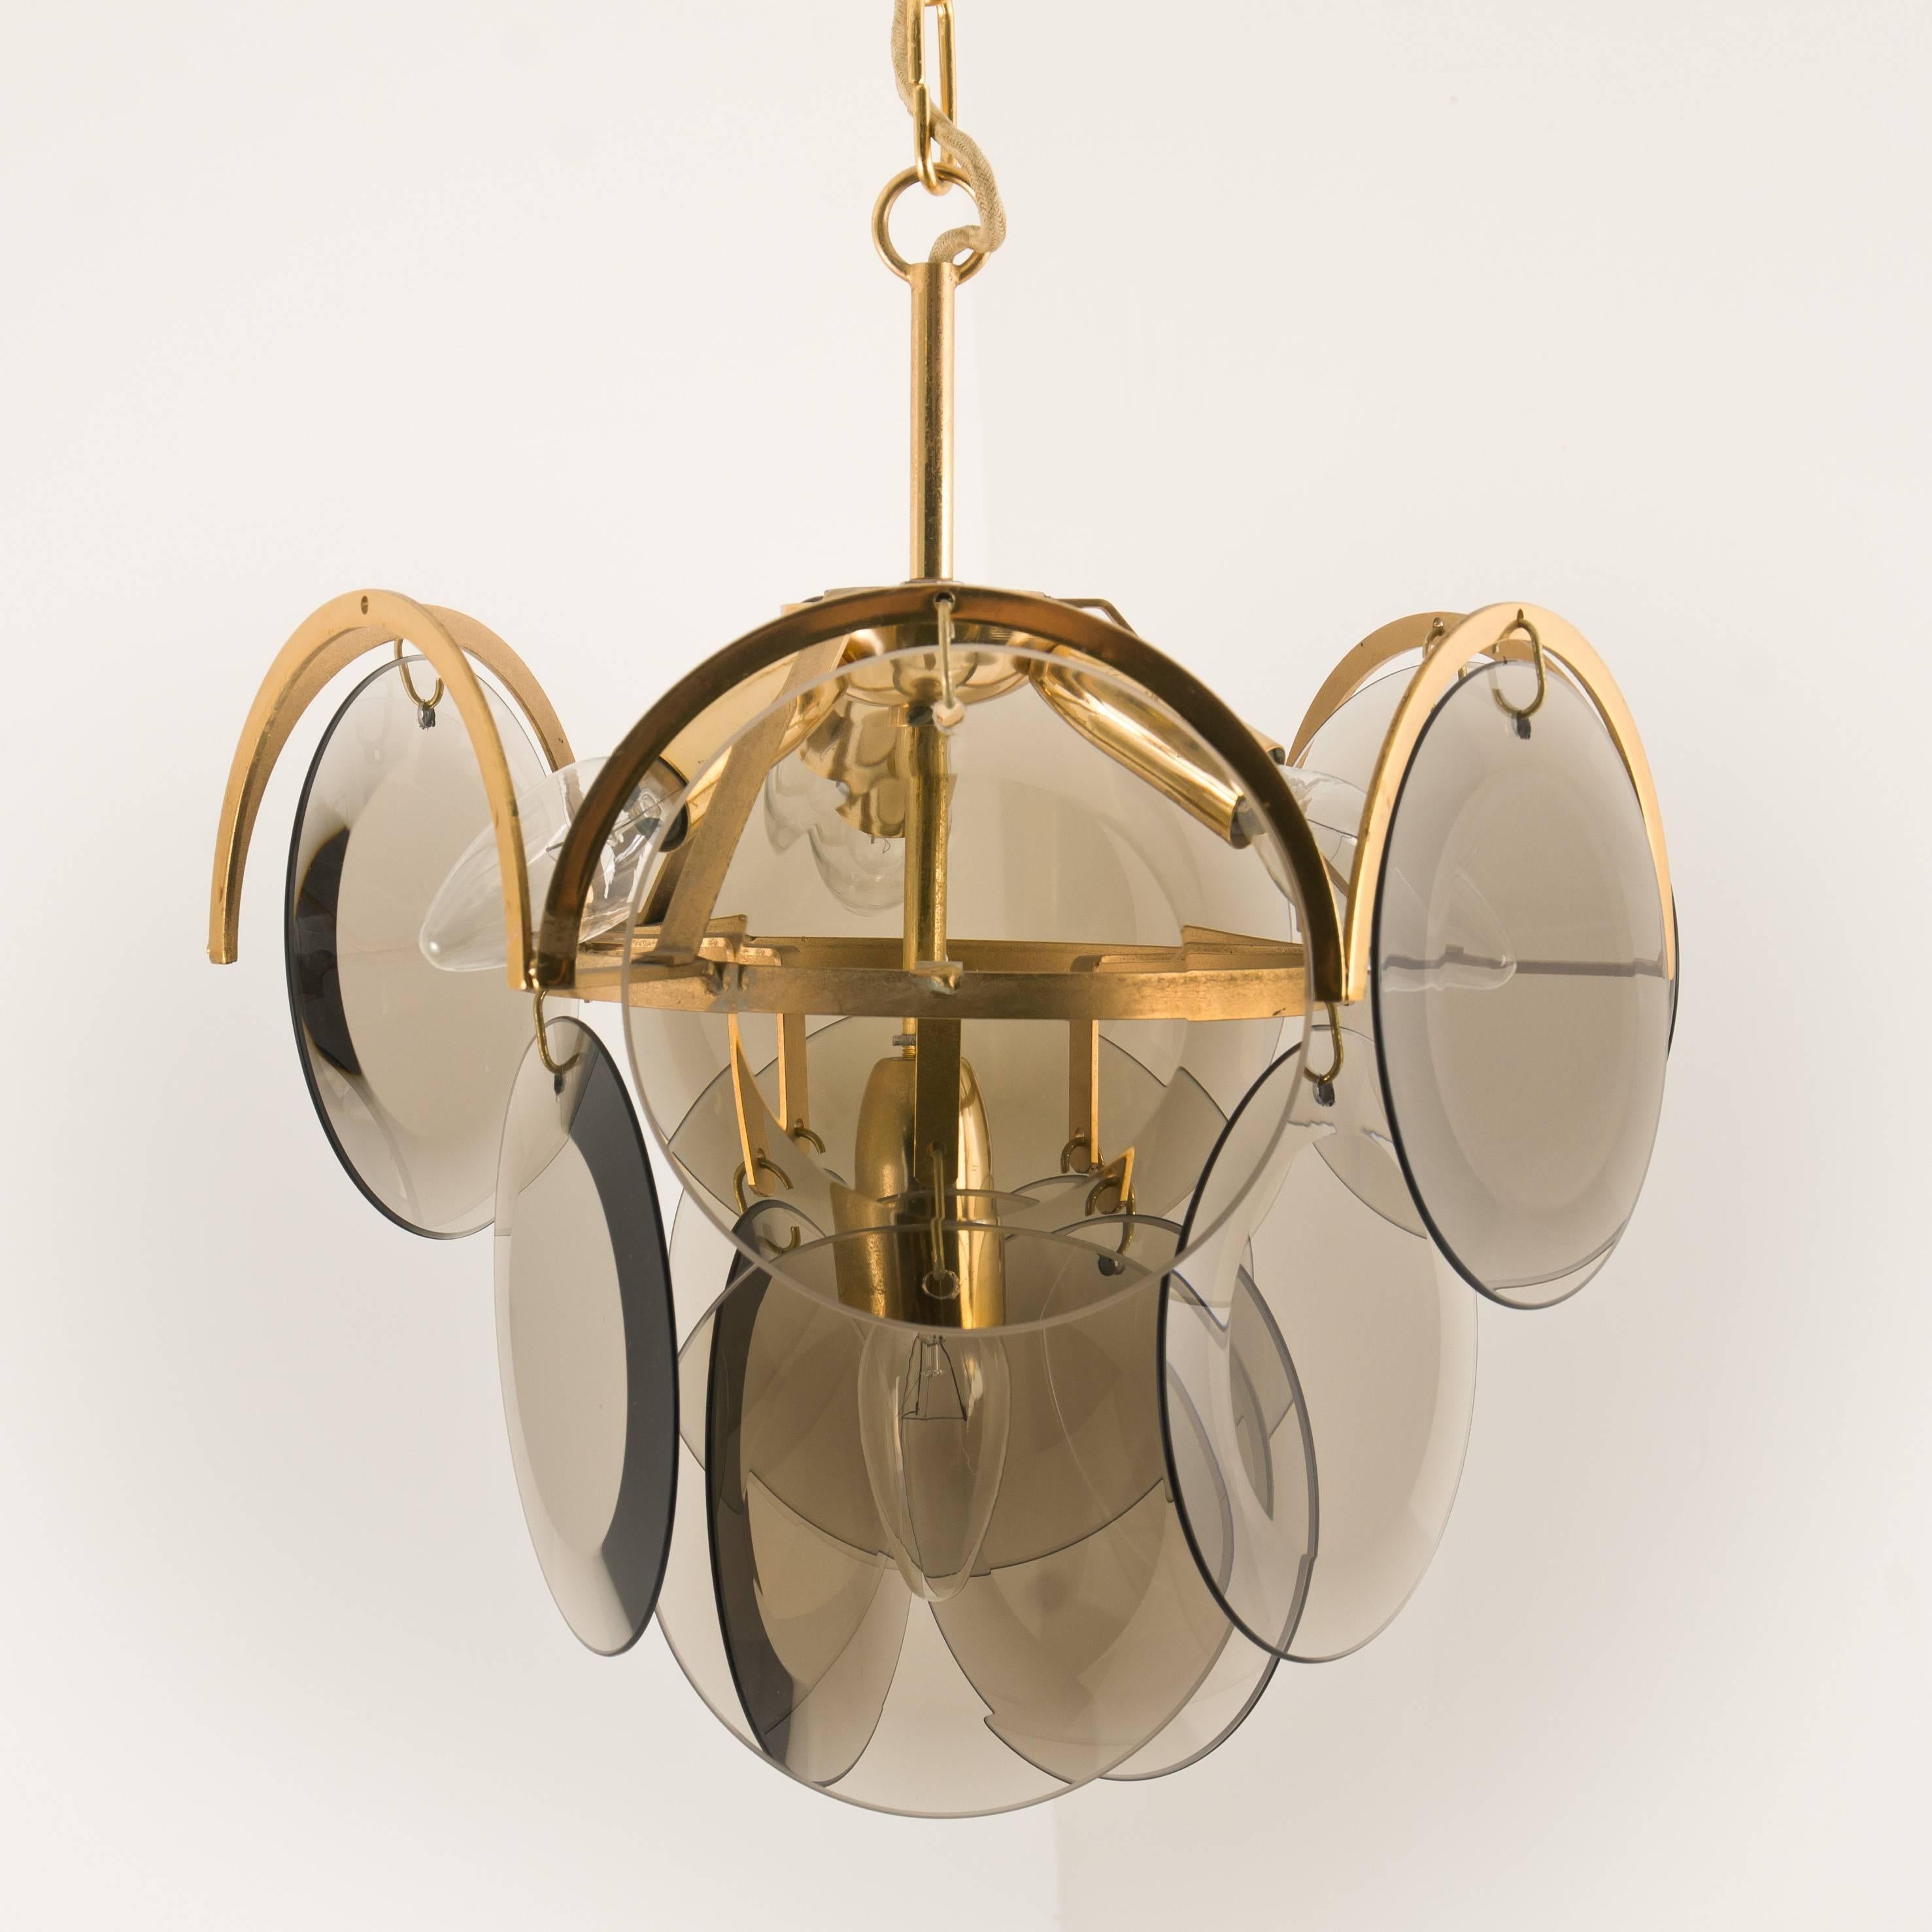 Set of Three Smoked Glass and Brass Chandeliers in the Style of Vistosi, Italy For Sale 7